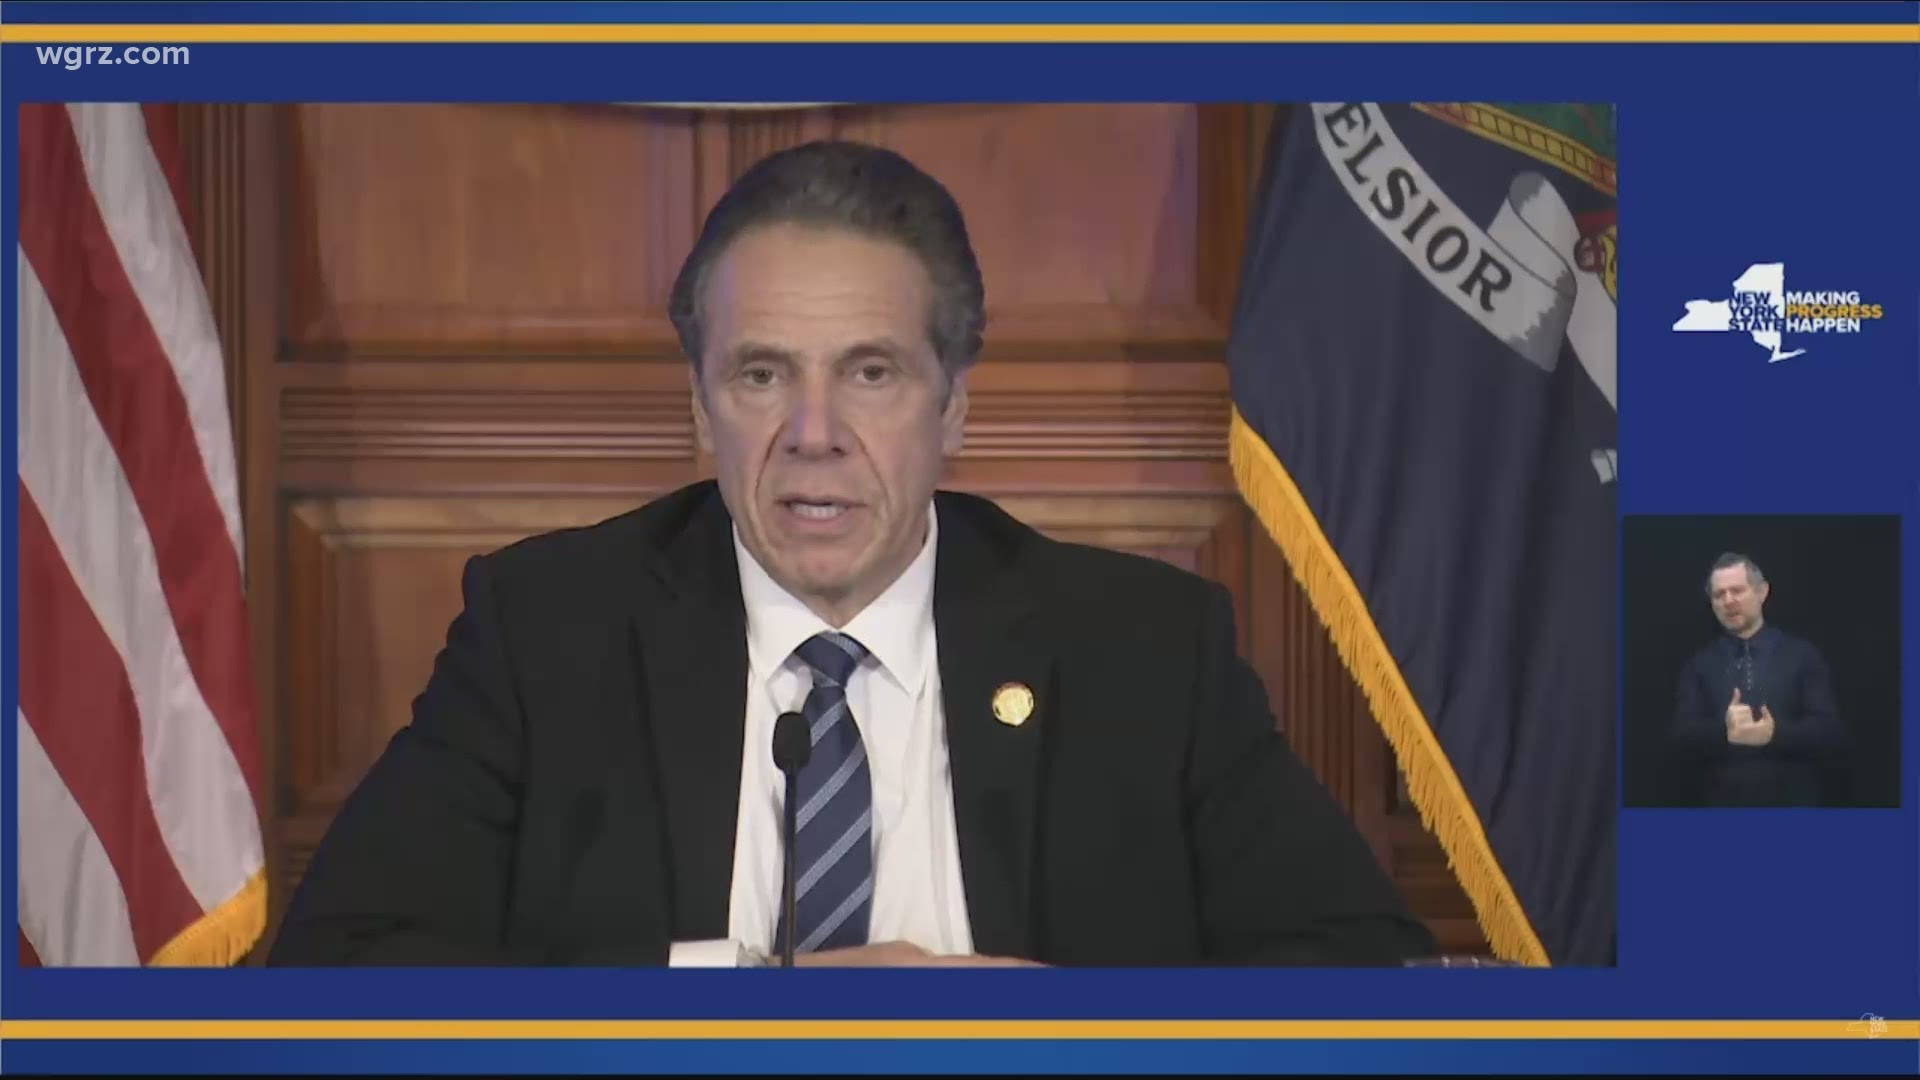 Looking back, none could have predicted the state of 2020, but this week Governor Cuomo will announce several proposals he hopes will help New York State rebound.